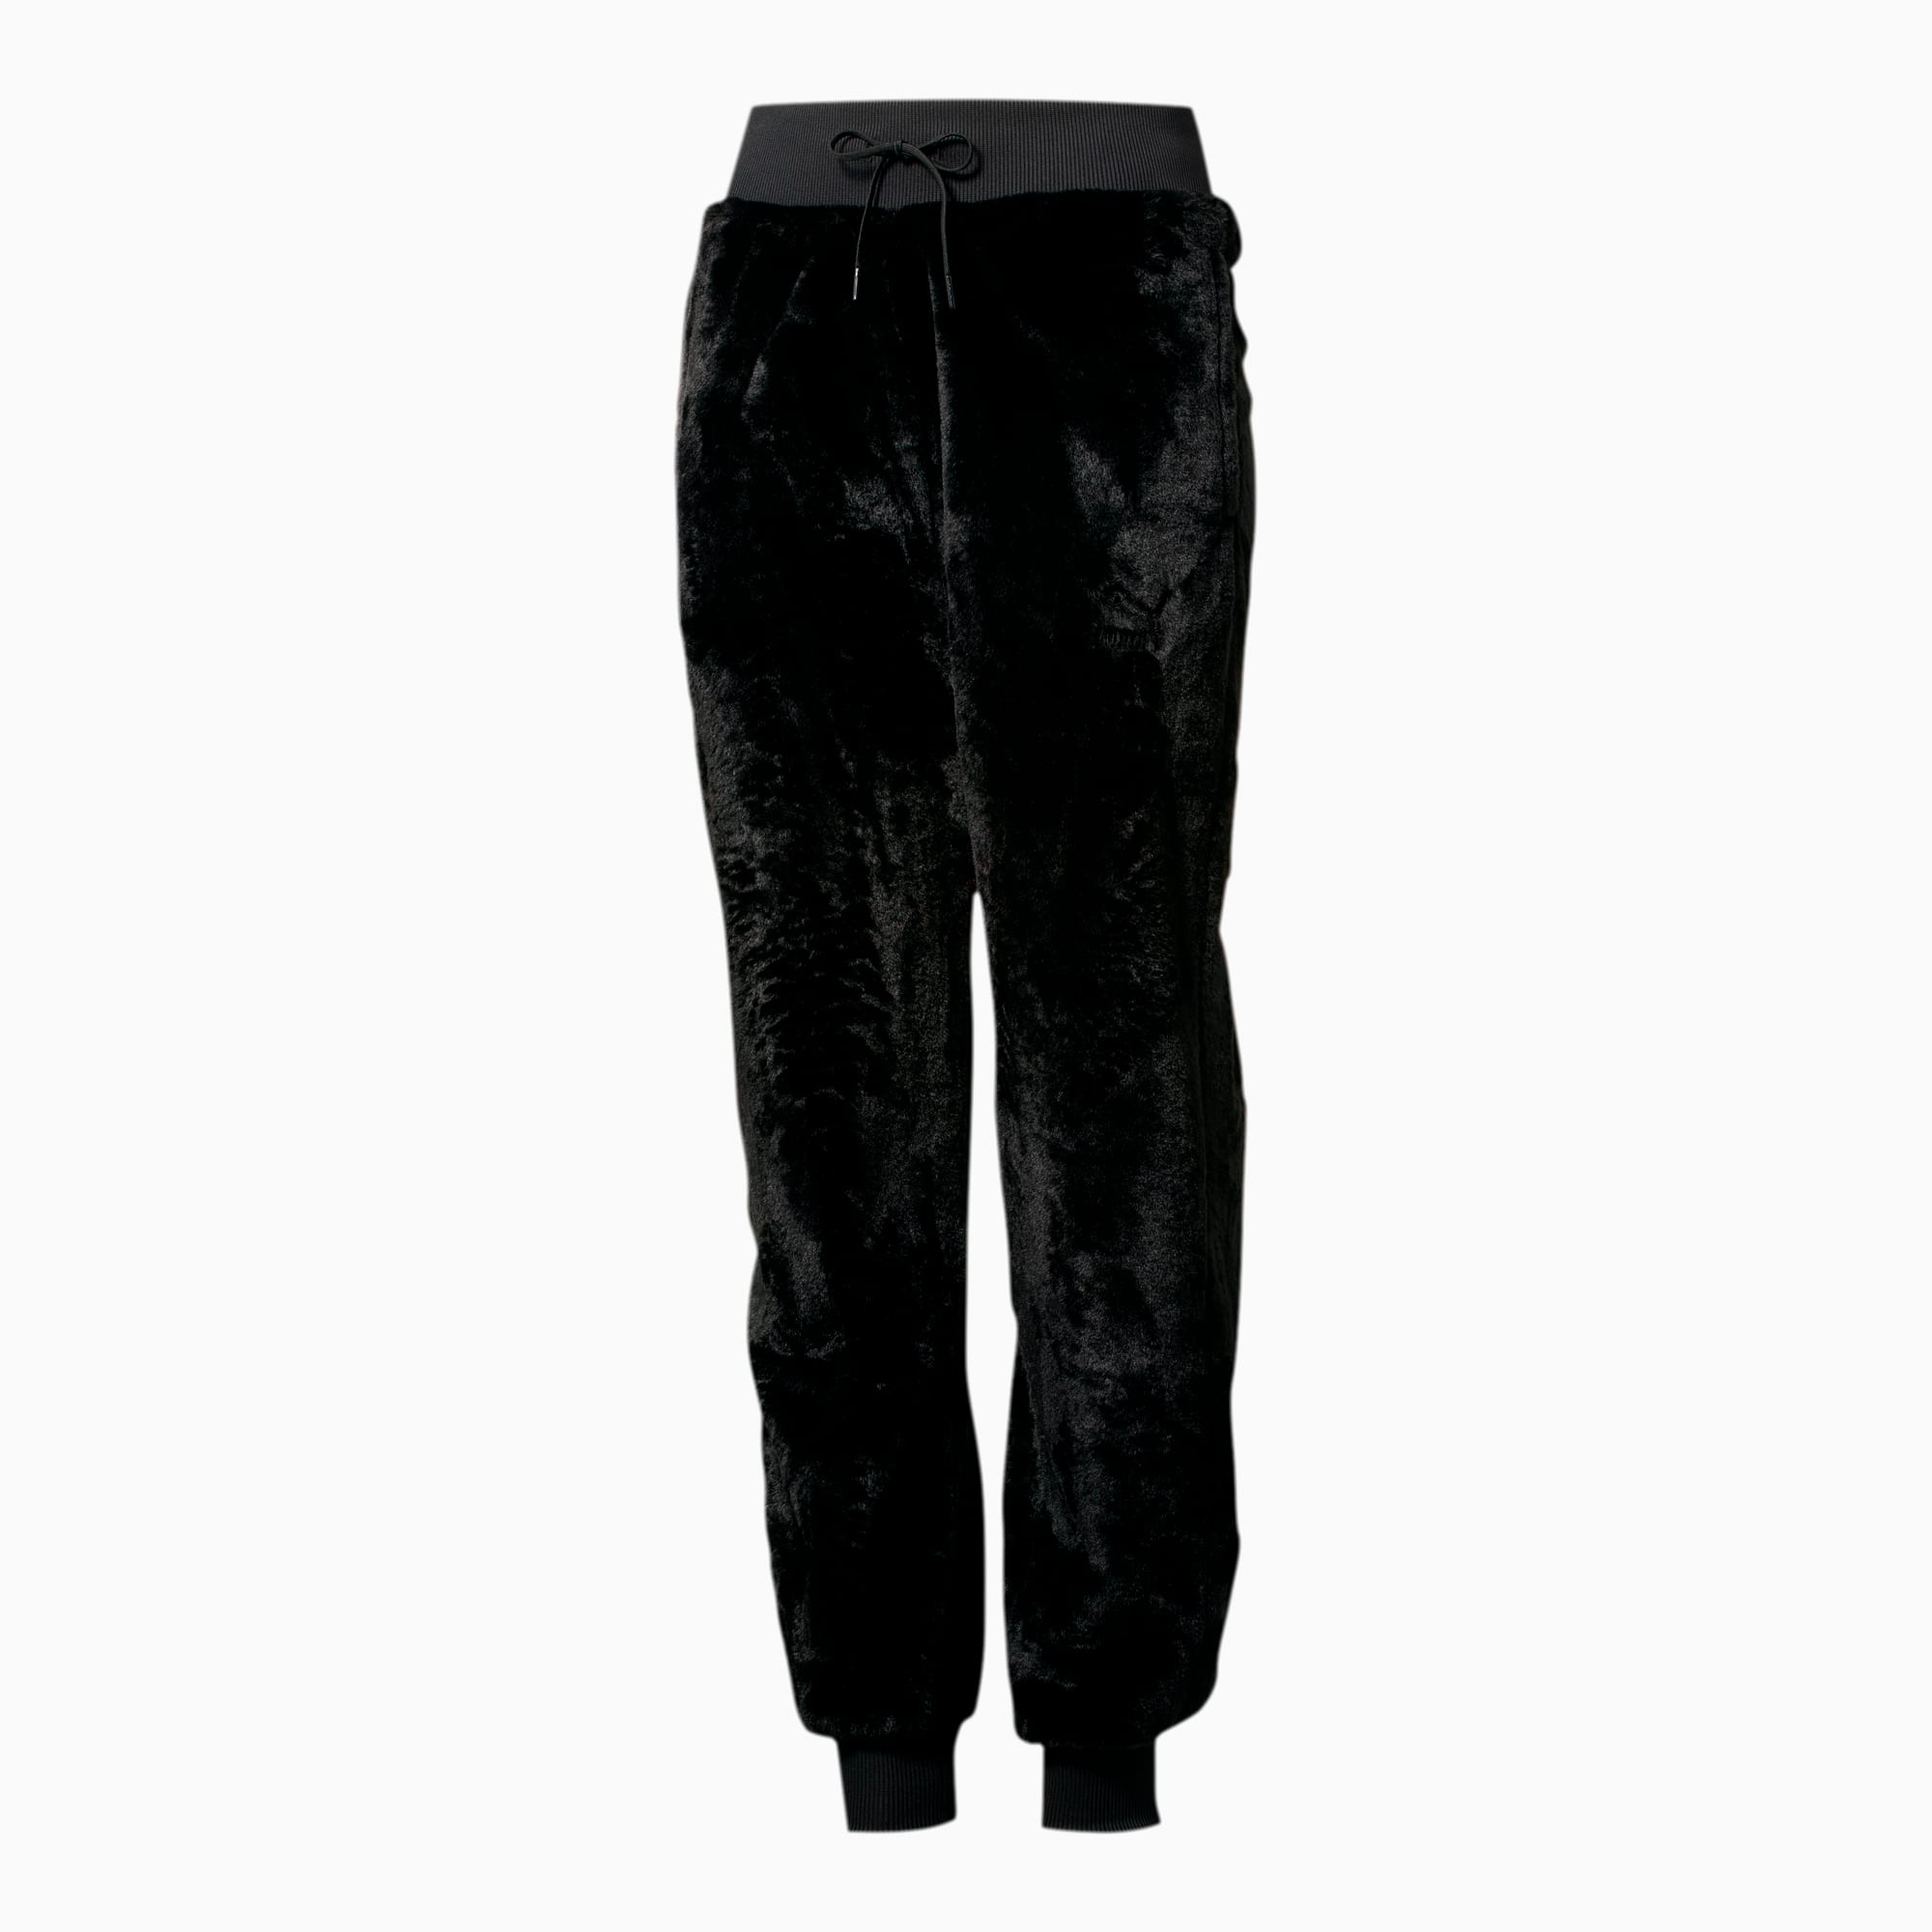 WT8716-Womens Fur Lined Pants (Assorted Colors & Sizes)